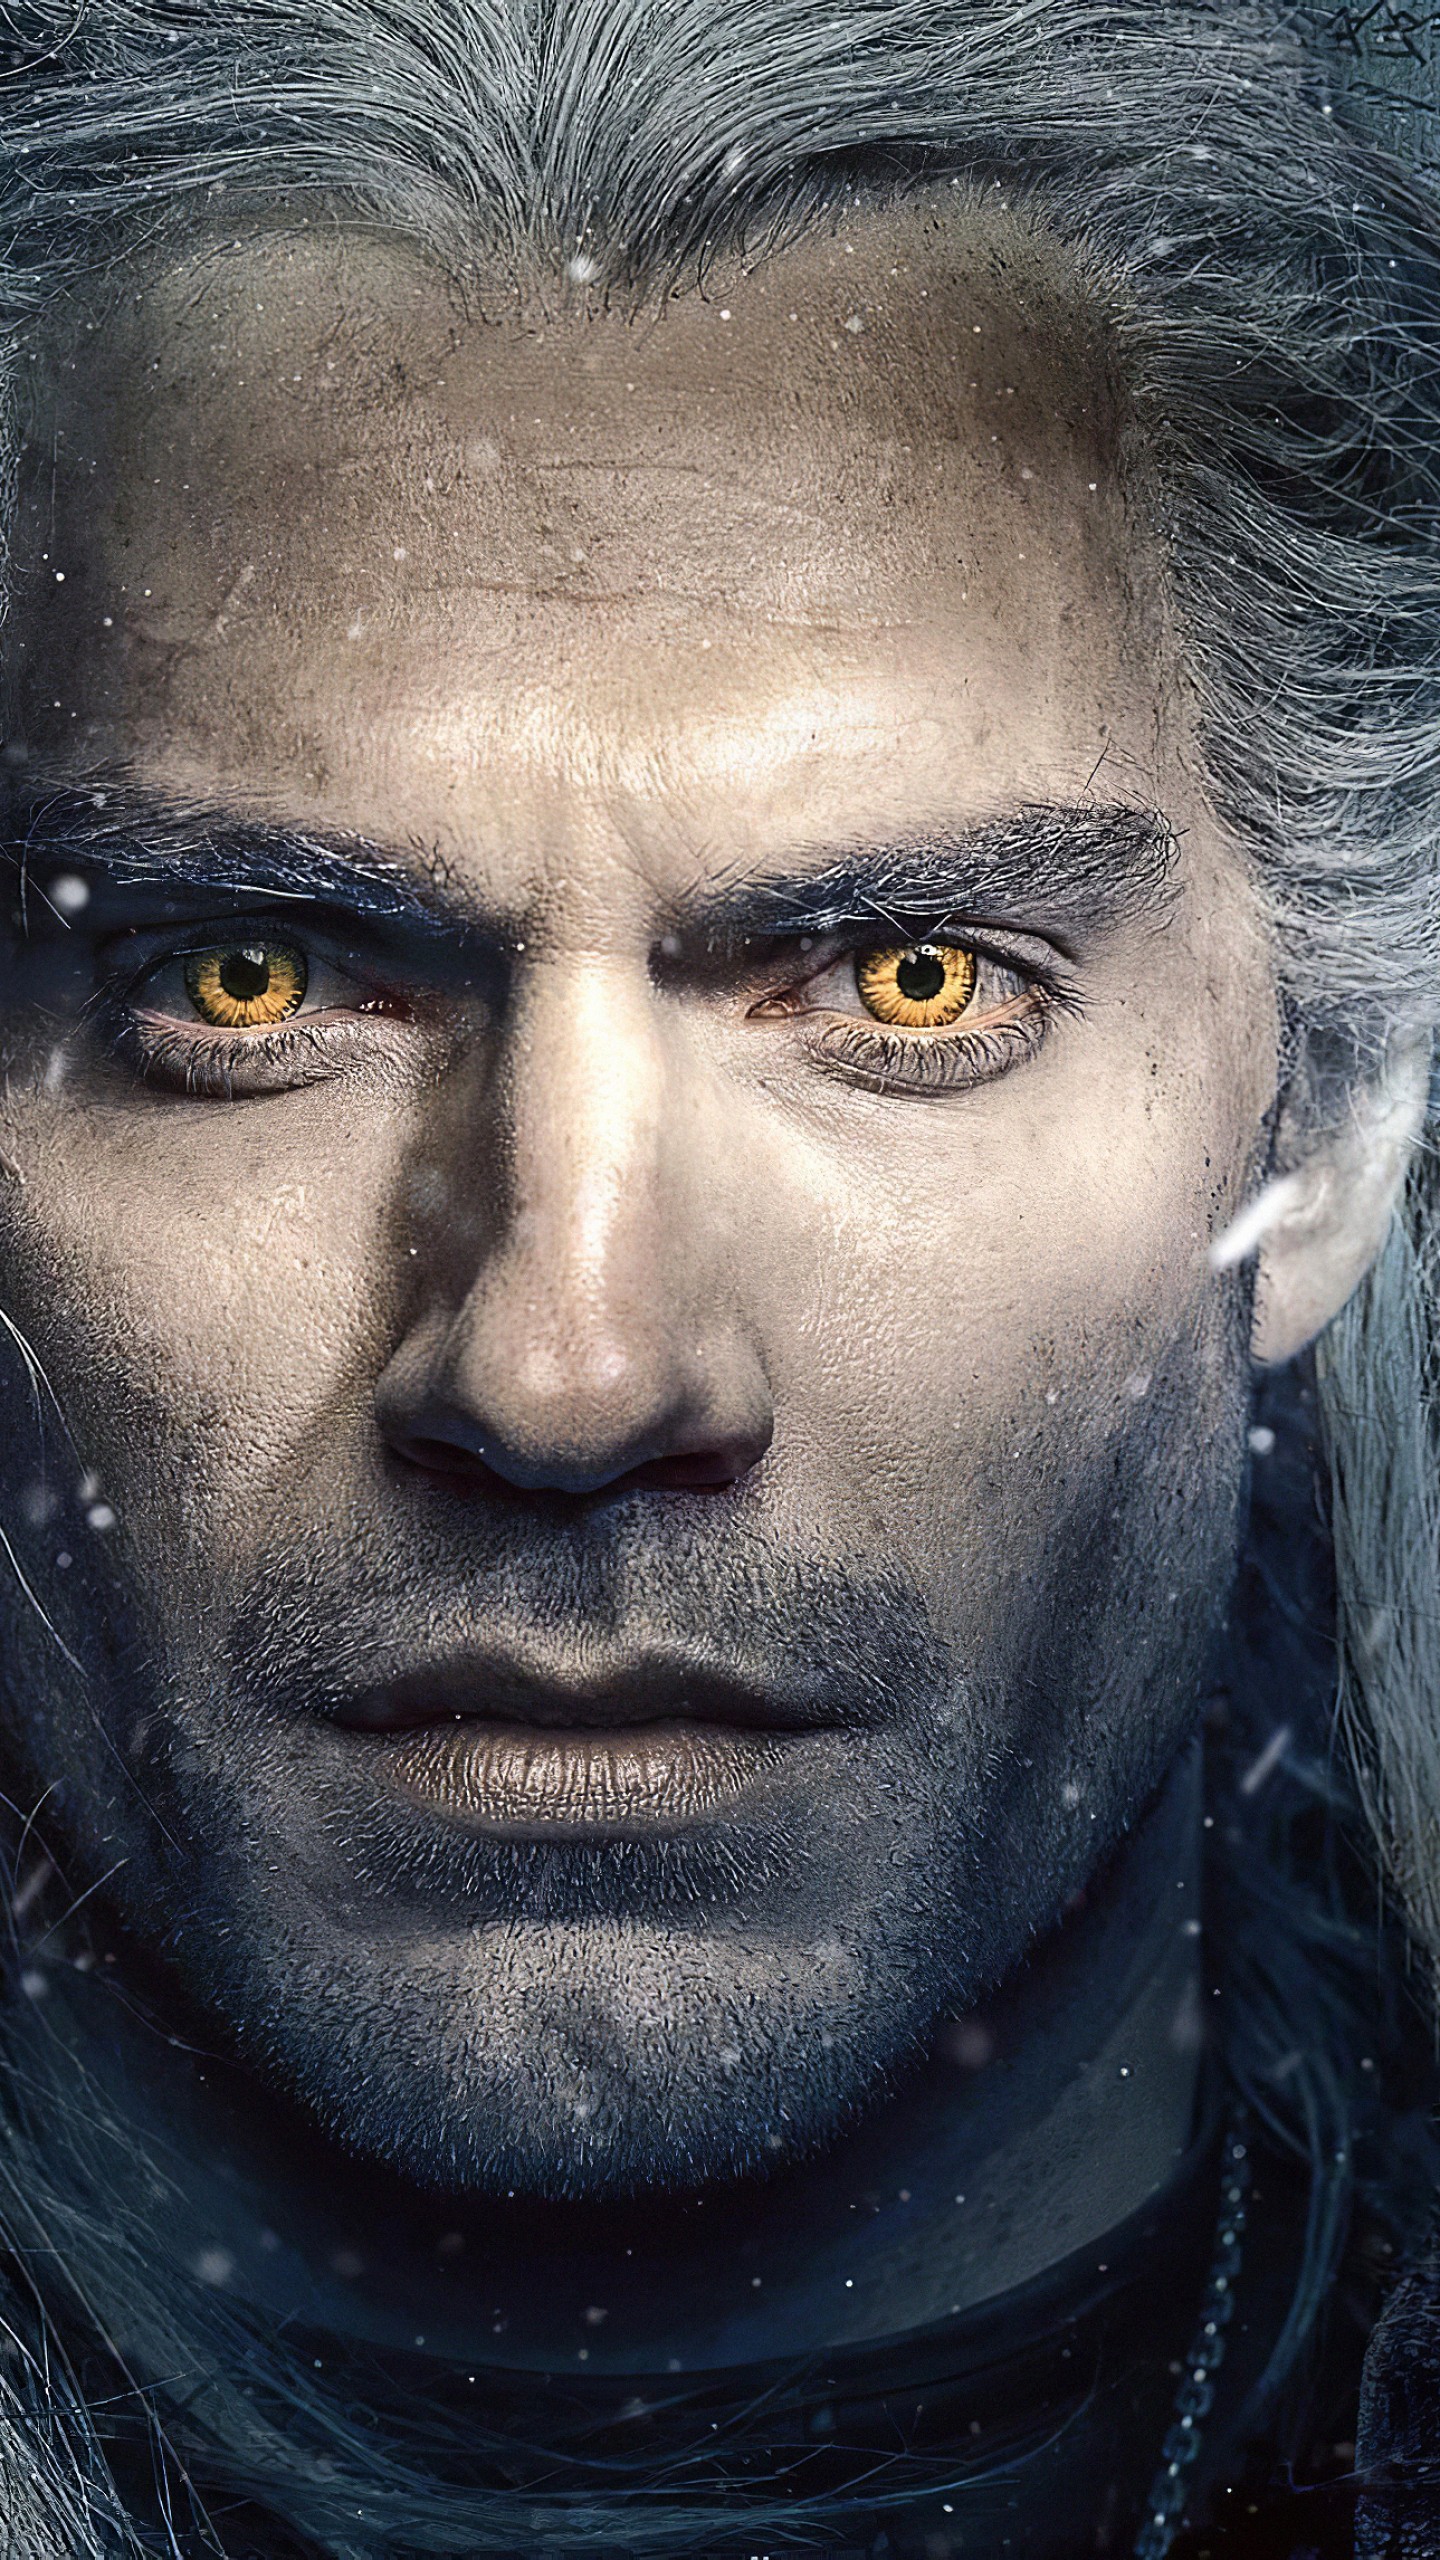 Wallpaper ID: 353551 / TV Show The Witcher Phone Wallpaper, Geralt Of  Rivia, Henry Cavill, 1080x2400 free download